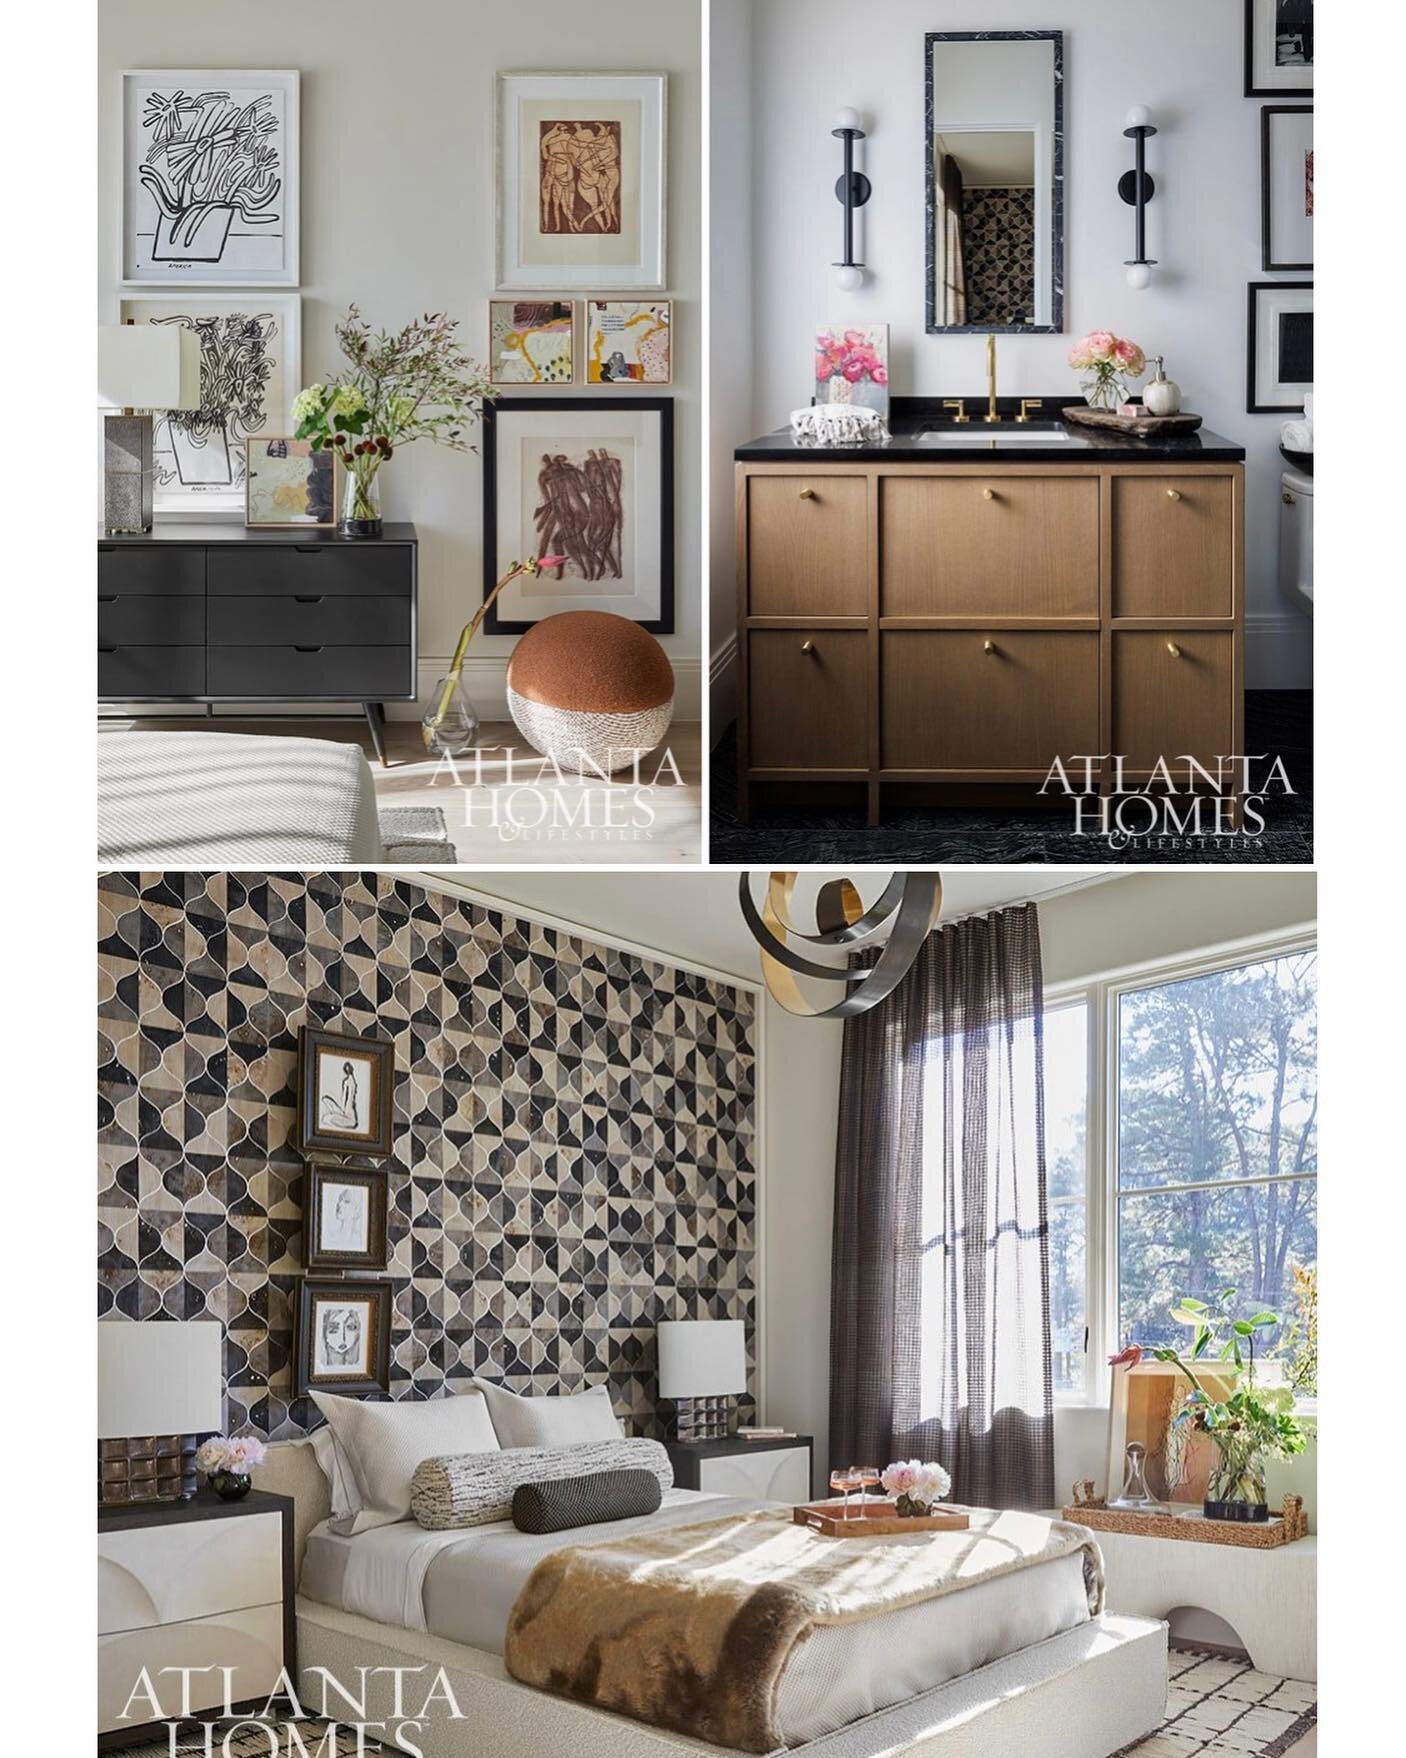 &hellip;pattern play&hellip;
&hellip;beautiful story board @atlantahomesmag for our reflective retreat at the 2023 @atlantaholidayhome featuring visual and tactile layers that sooth the soul.  We loved watching people enjoy this quiet moment, reachin